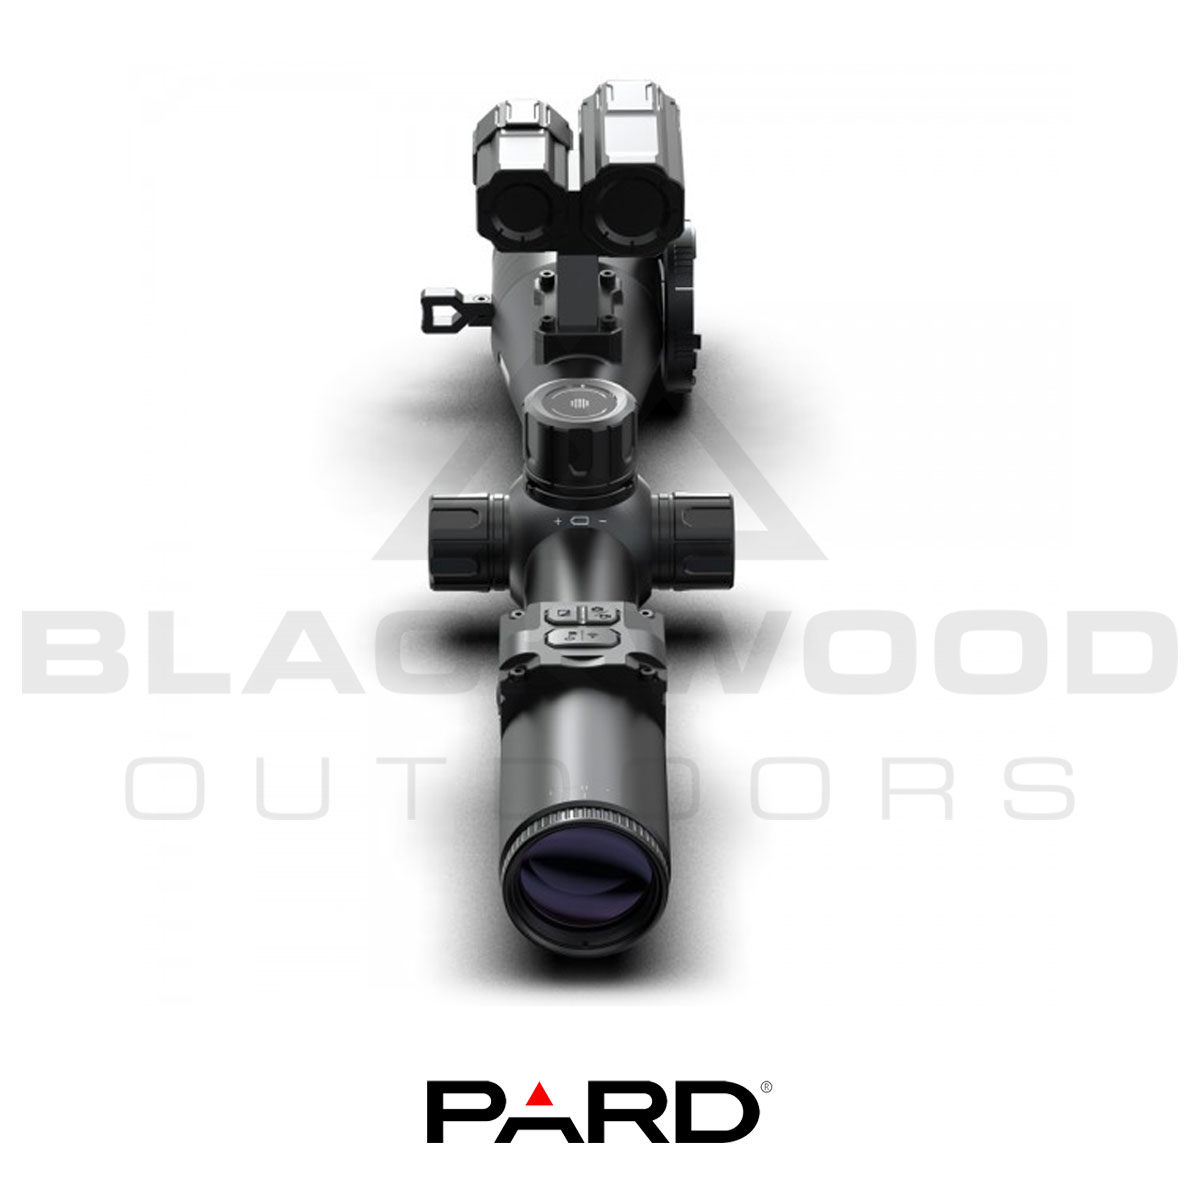 Pard DS35 LRF Night Vision Scope Top View